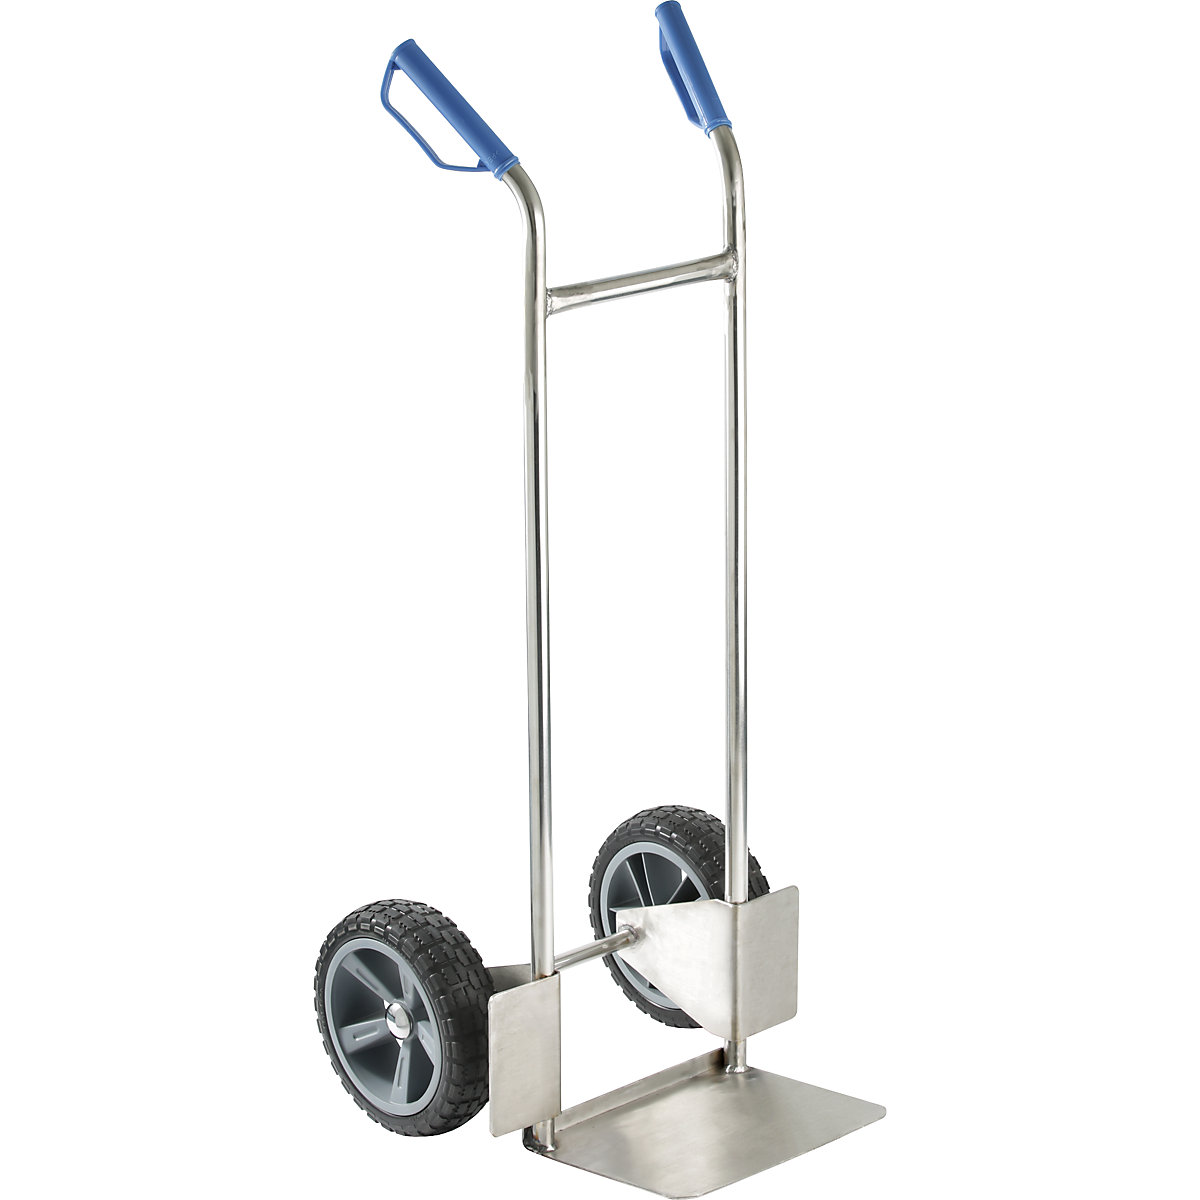 Stainless steel sack truck – eurokraft basic, with polyurethane tyres, max. load 150 kg, 5+ items-6